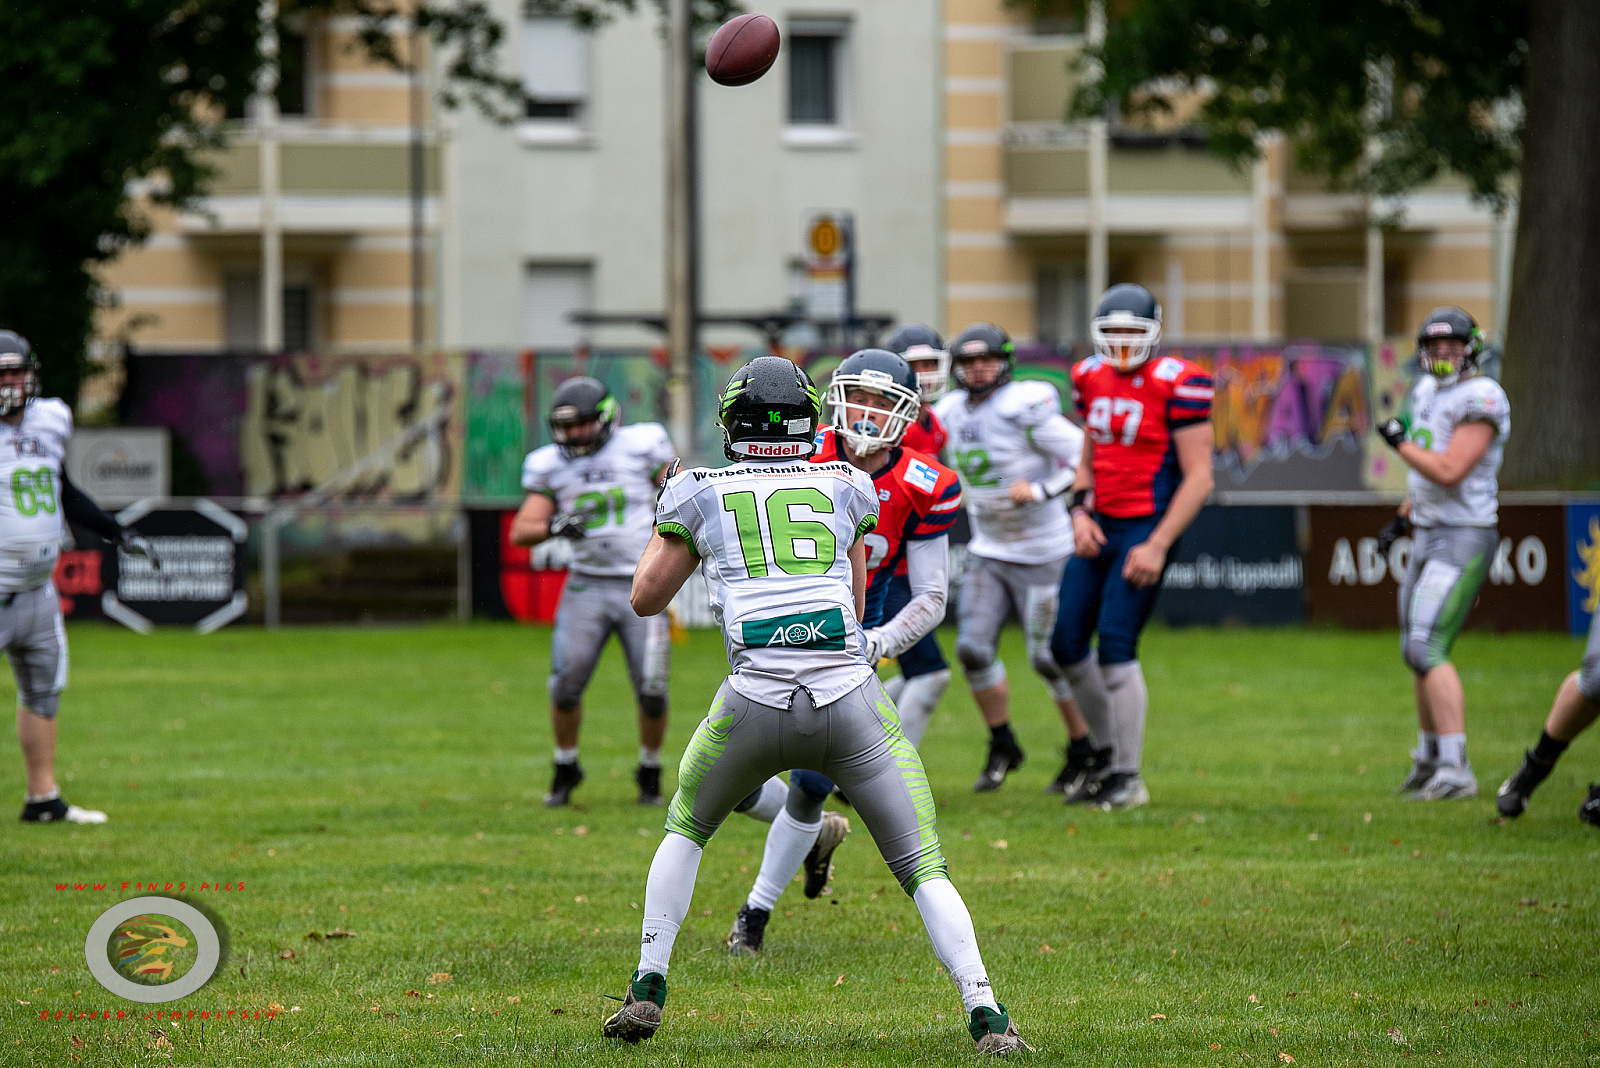 Lippstadt Eagles vs. Recklinghausen Chargers